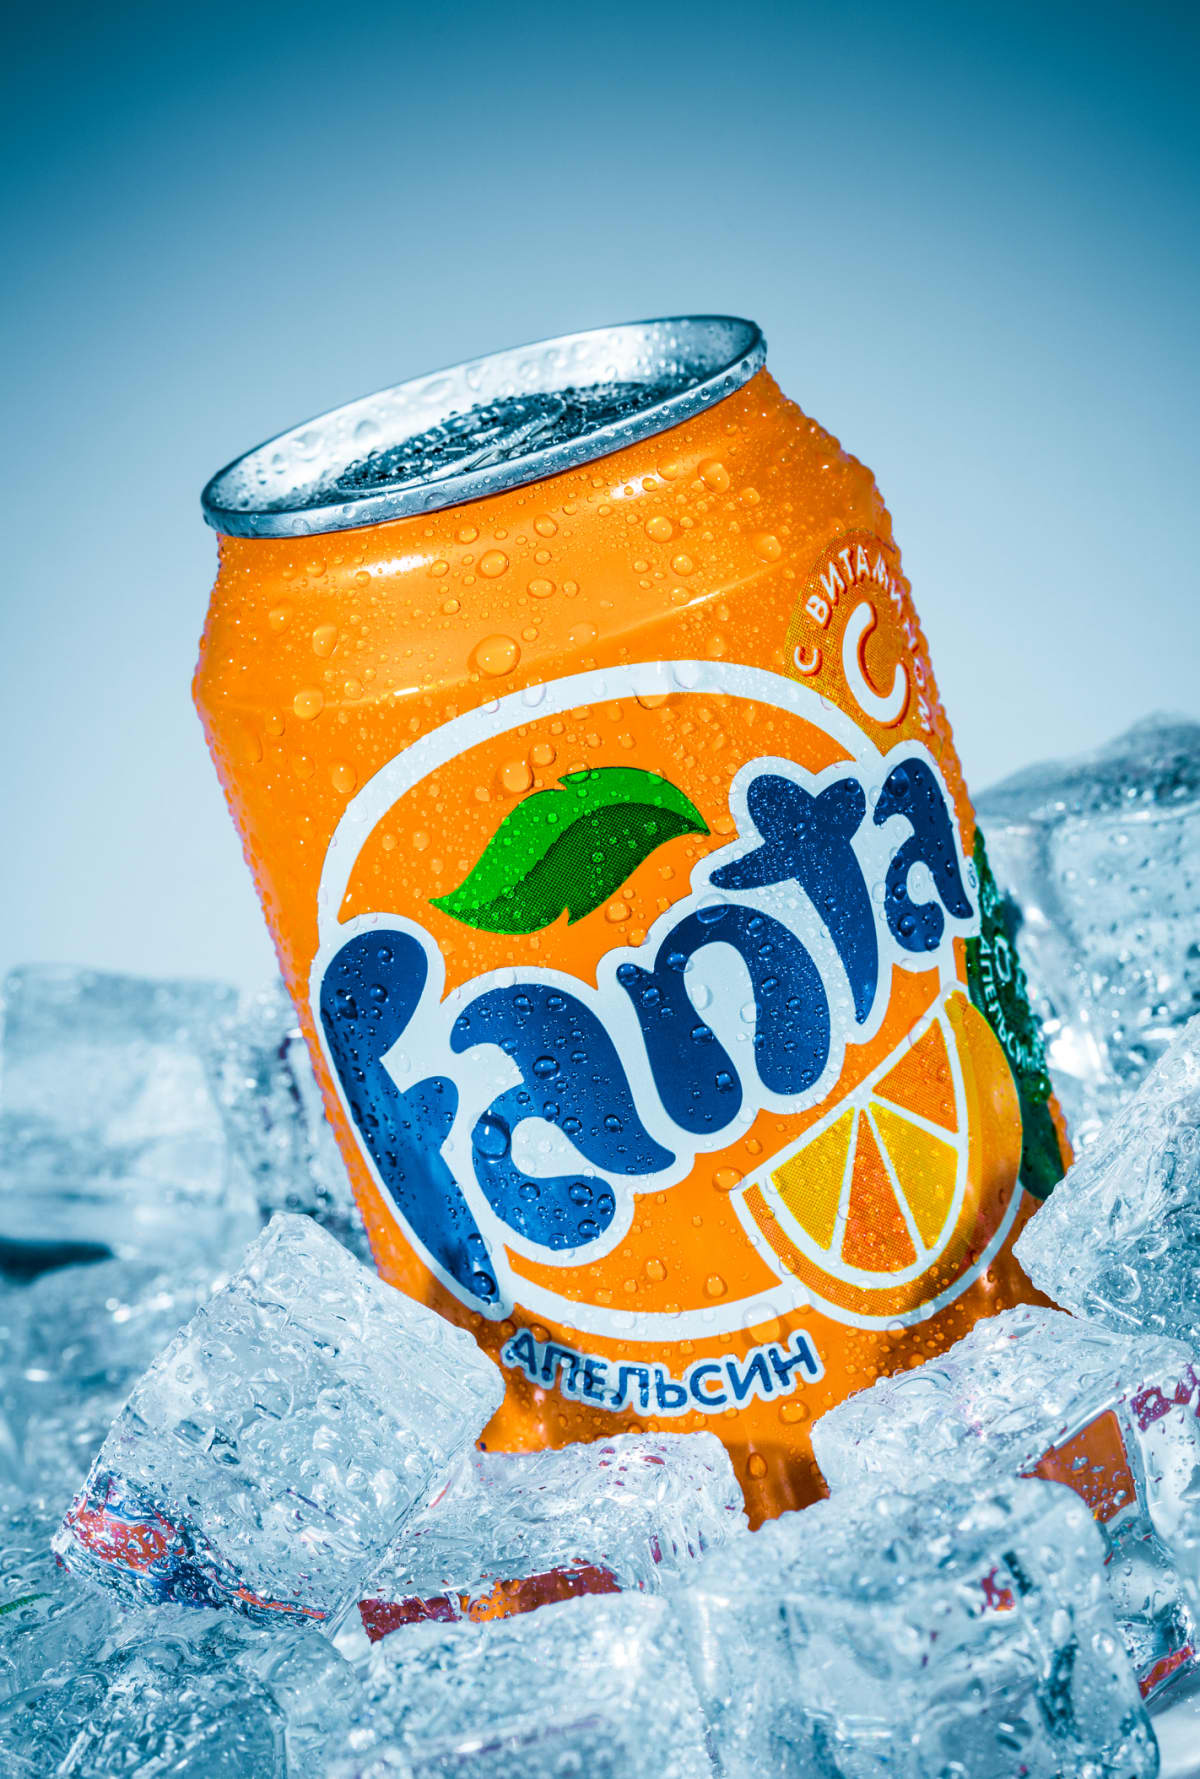 Moscow, Russia - April 3, 2014: Can of Coca Cola company soft drink Fanta Orange on ice. Fanta is a global brand of fruit-flavored carbonated soft drinks created by The Coca-Cola Company.